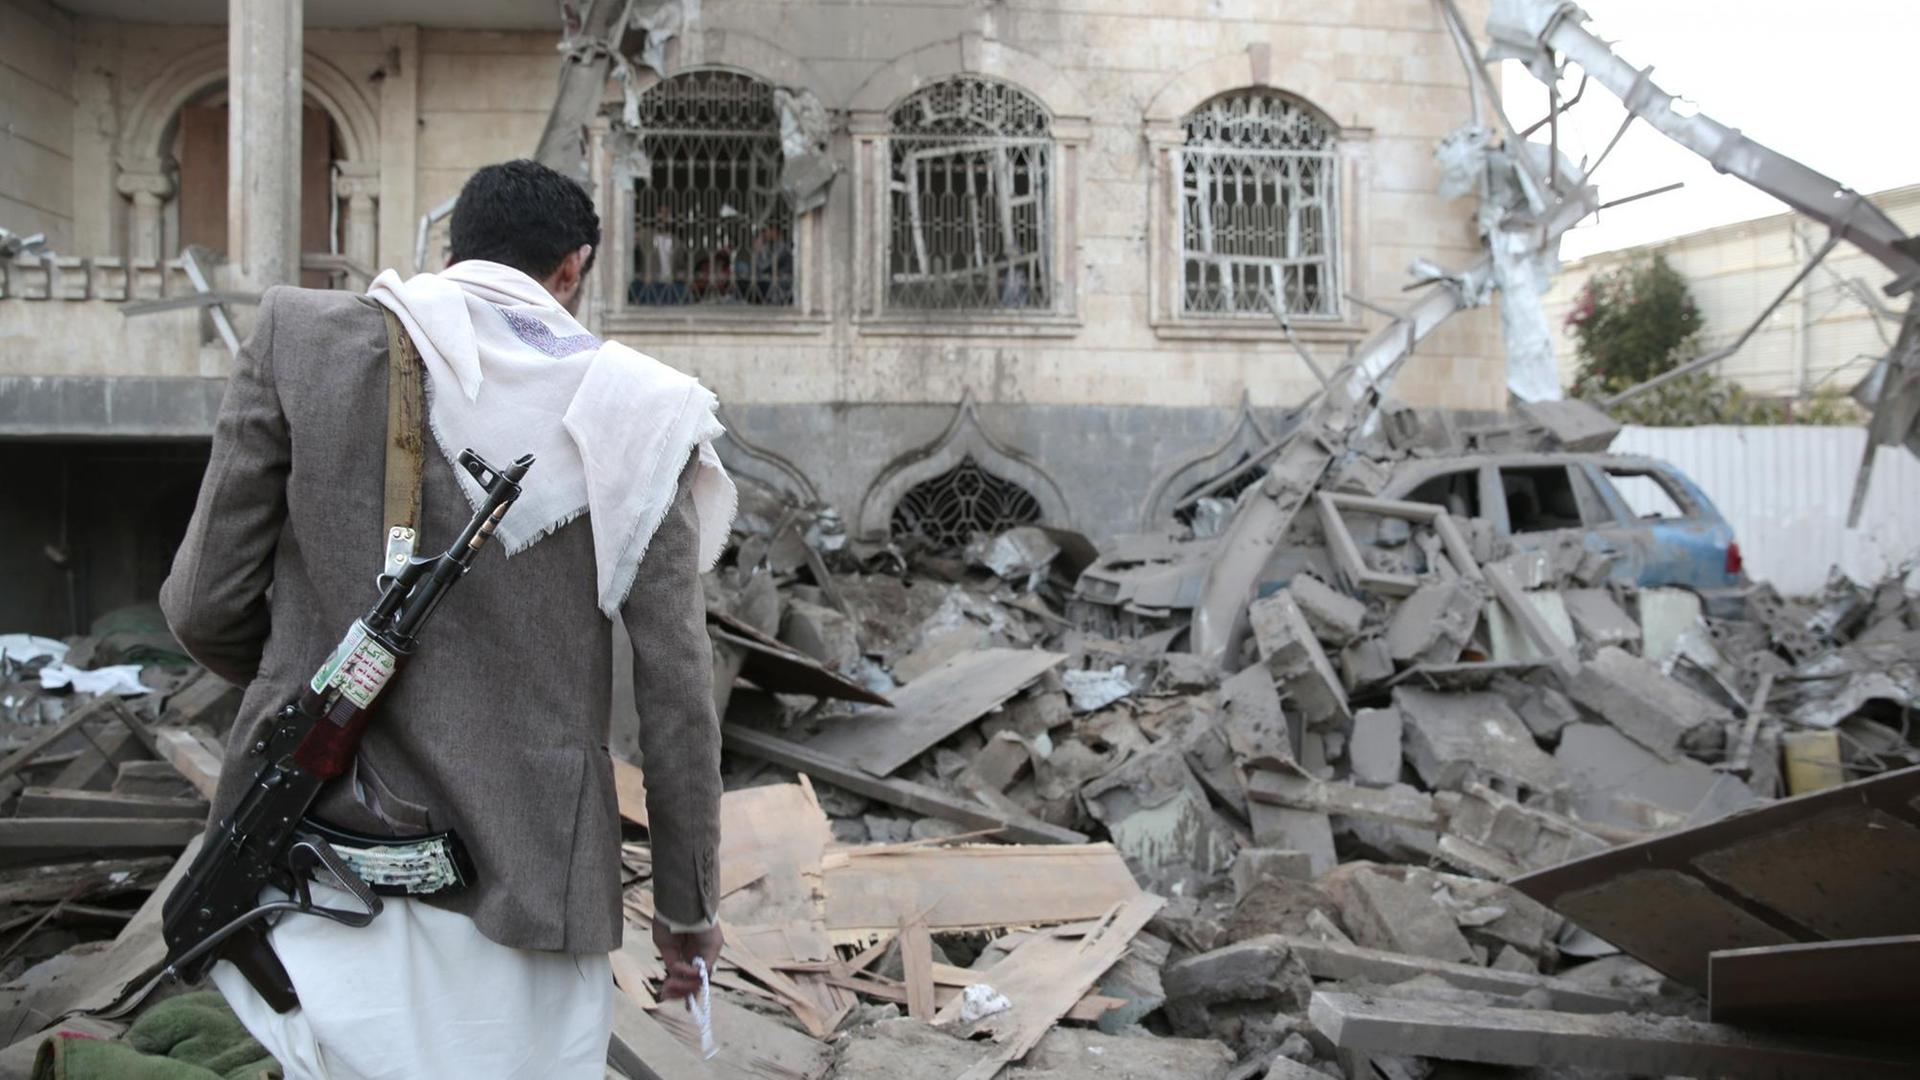 A man inspects the rubble of houses allegedly destroyed by Saudi-led air strikes in Sanaa, Yemen, 09 June 2017. A Saudi-led airstrike hit a house in Yemen's capital Sanaa, on Friday, killing four civilians, including women and children, and injuring a number of others, Yemen's local Saba news reported.